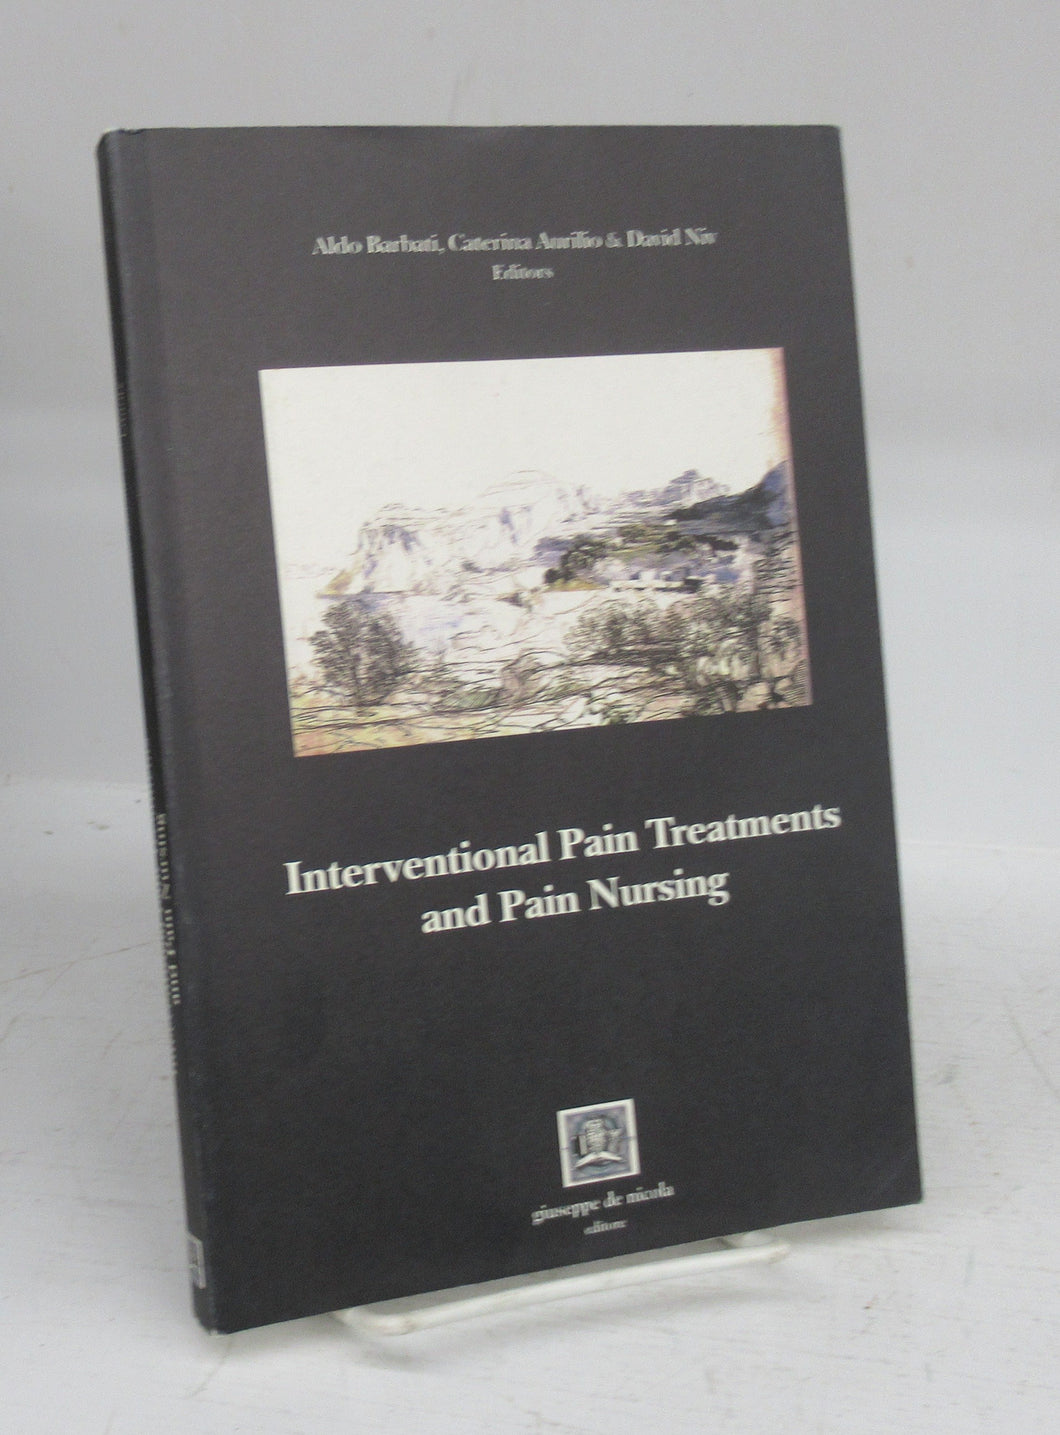 Interventional Pain Treatments and Pain Nursing